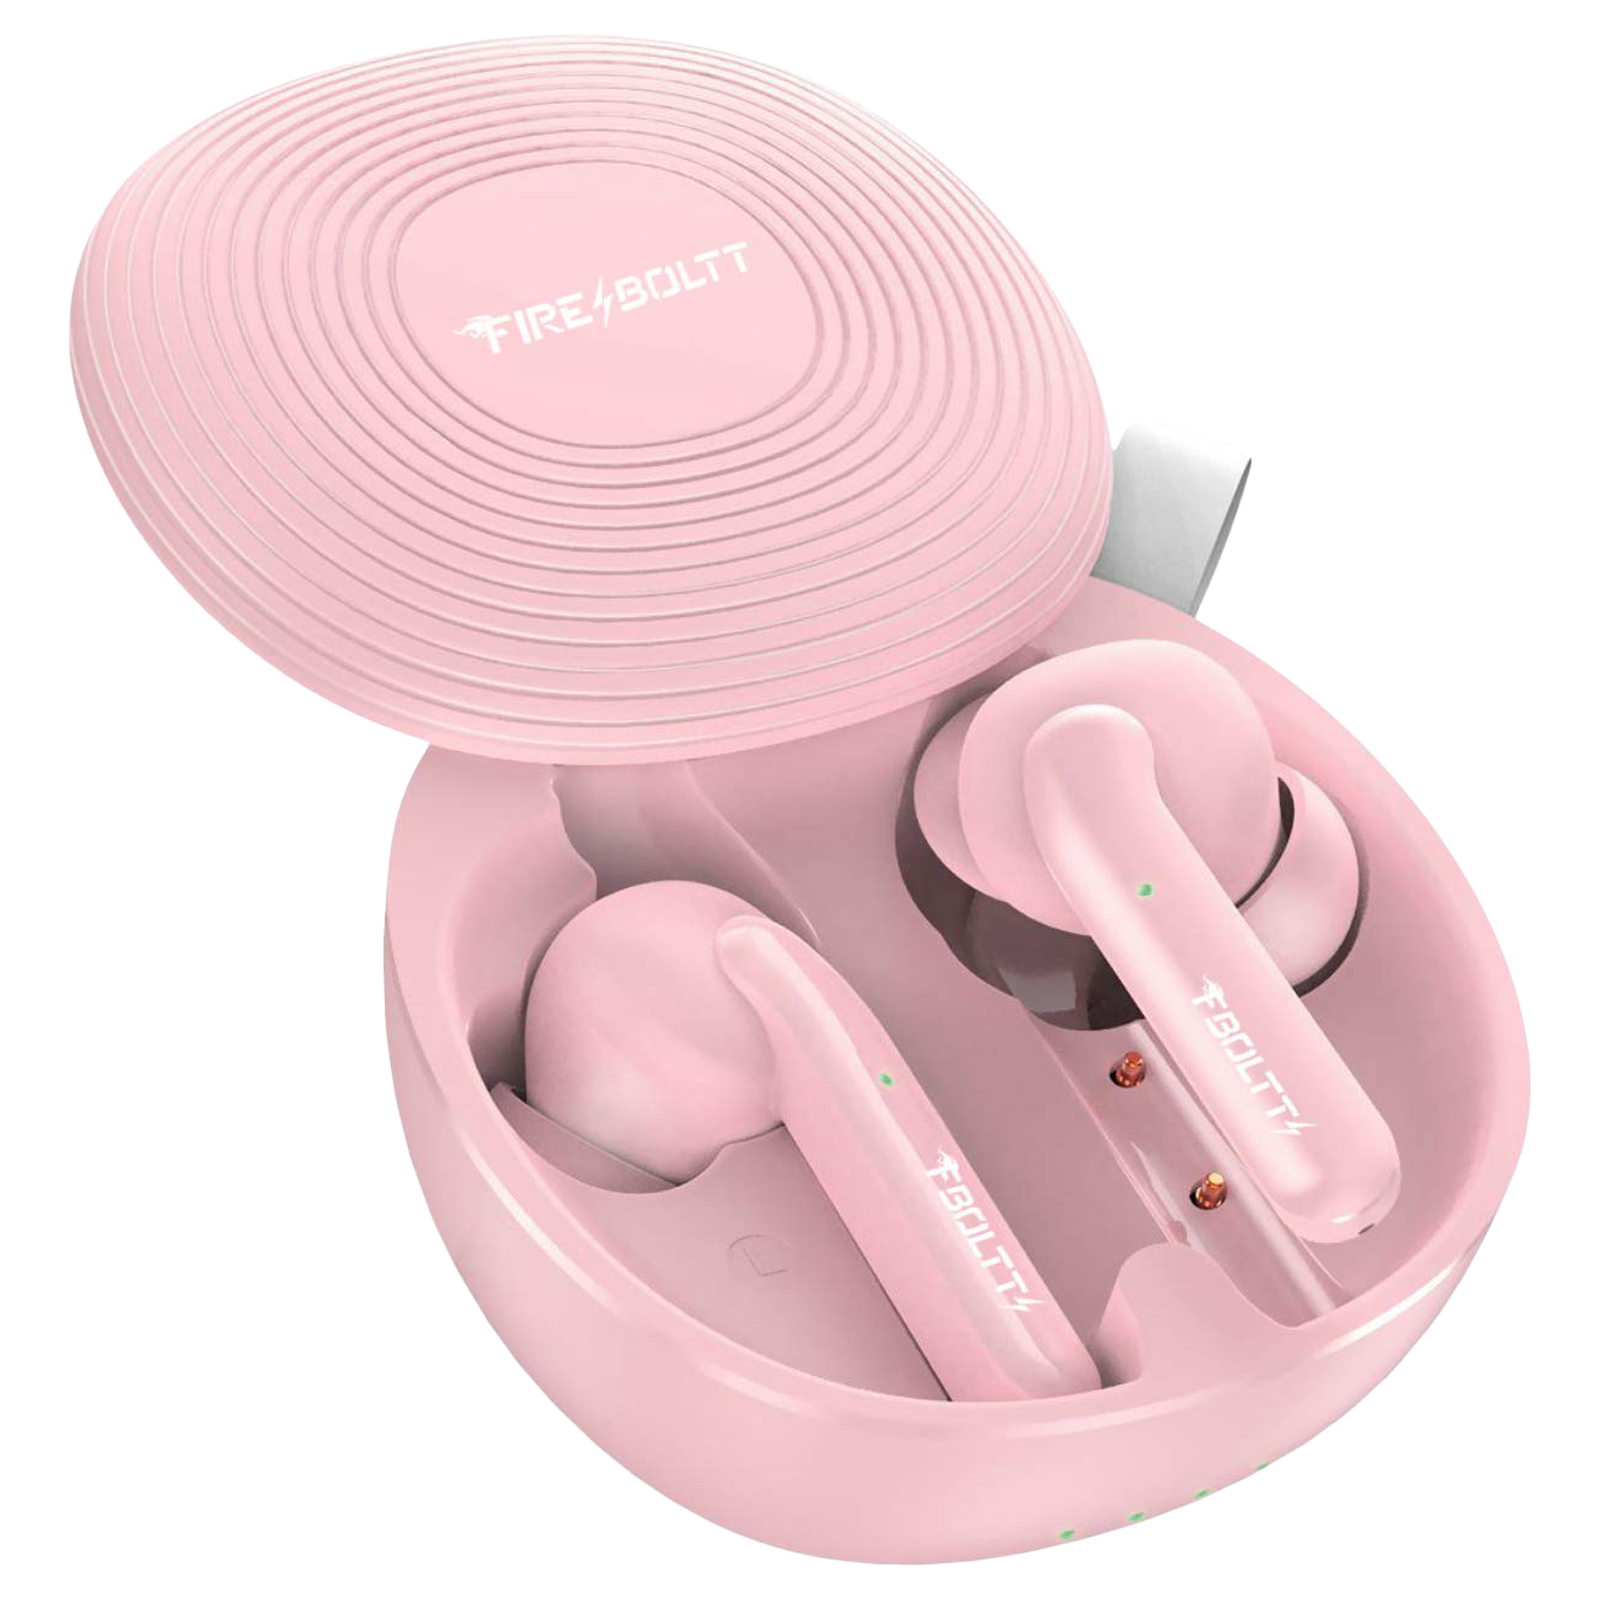 Fire-Boltt BE1101 BE1100 In-Ear Noise Isolation Truly Wireless Earbuds with Mic (Bluetooth 5.0, 6D Stereo Sound, Pink)_1